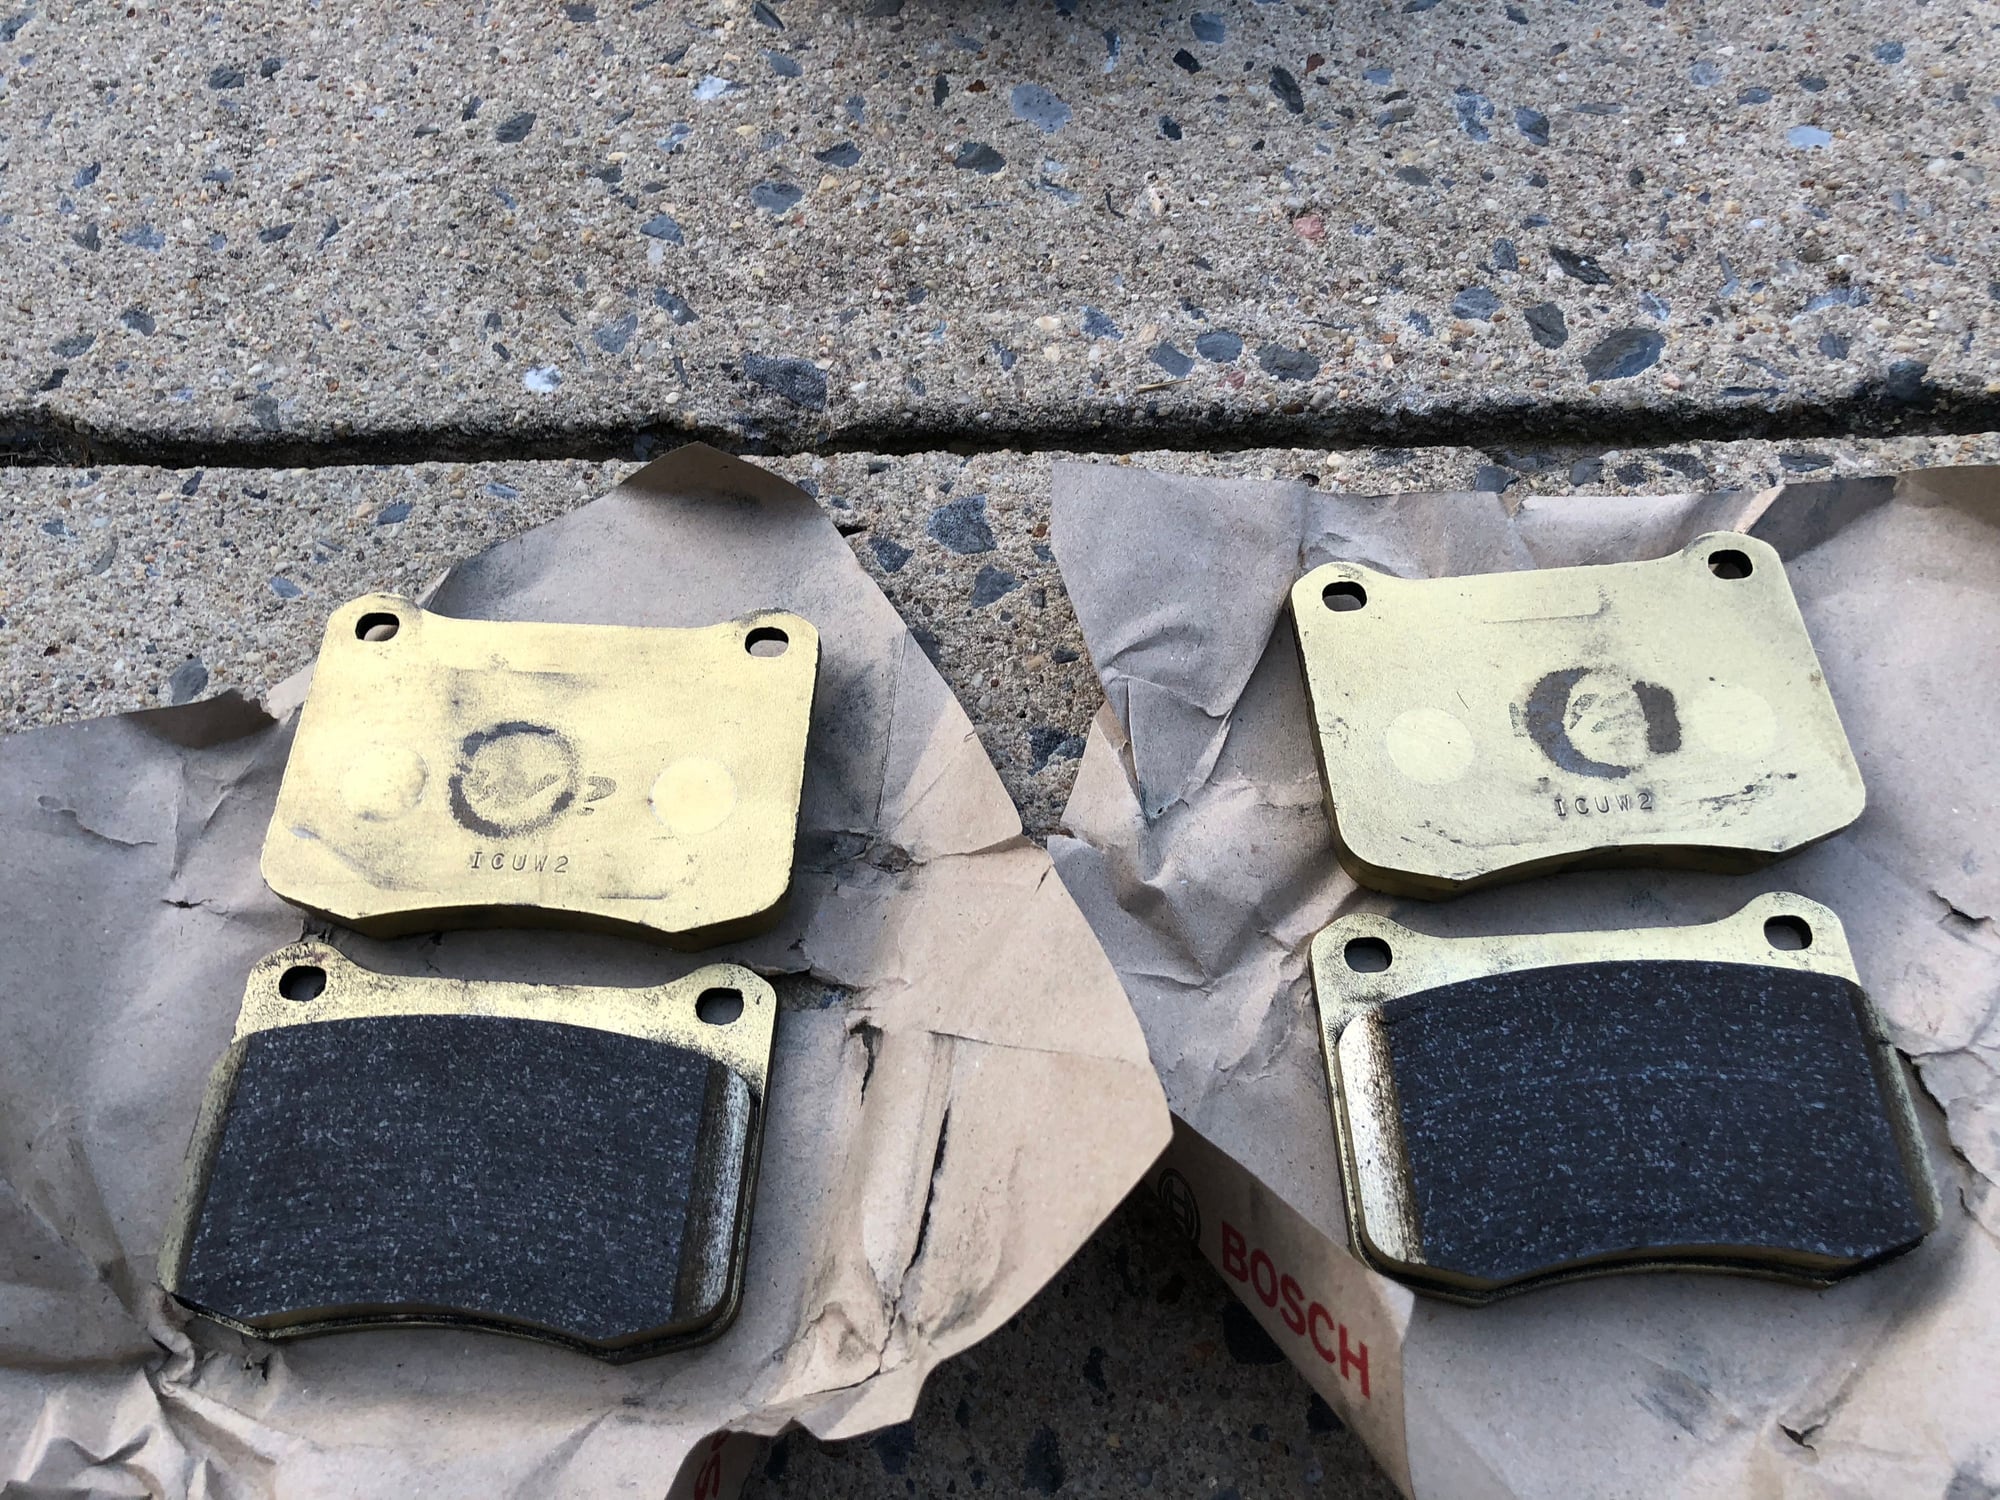 Brakes - Winmax W2 like new less than 300 miles - Used - 2008 to 2014 Lexus IS F - Germantown, MD 20874, United States